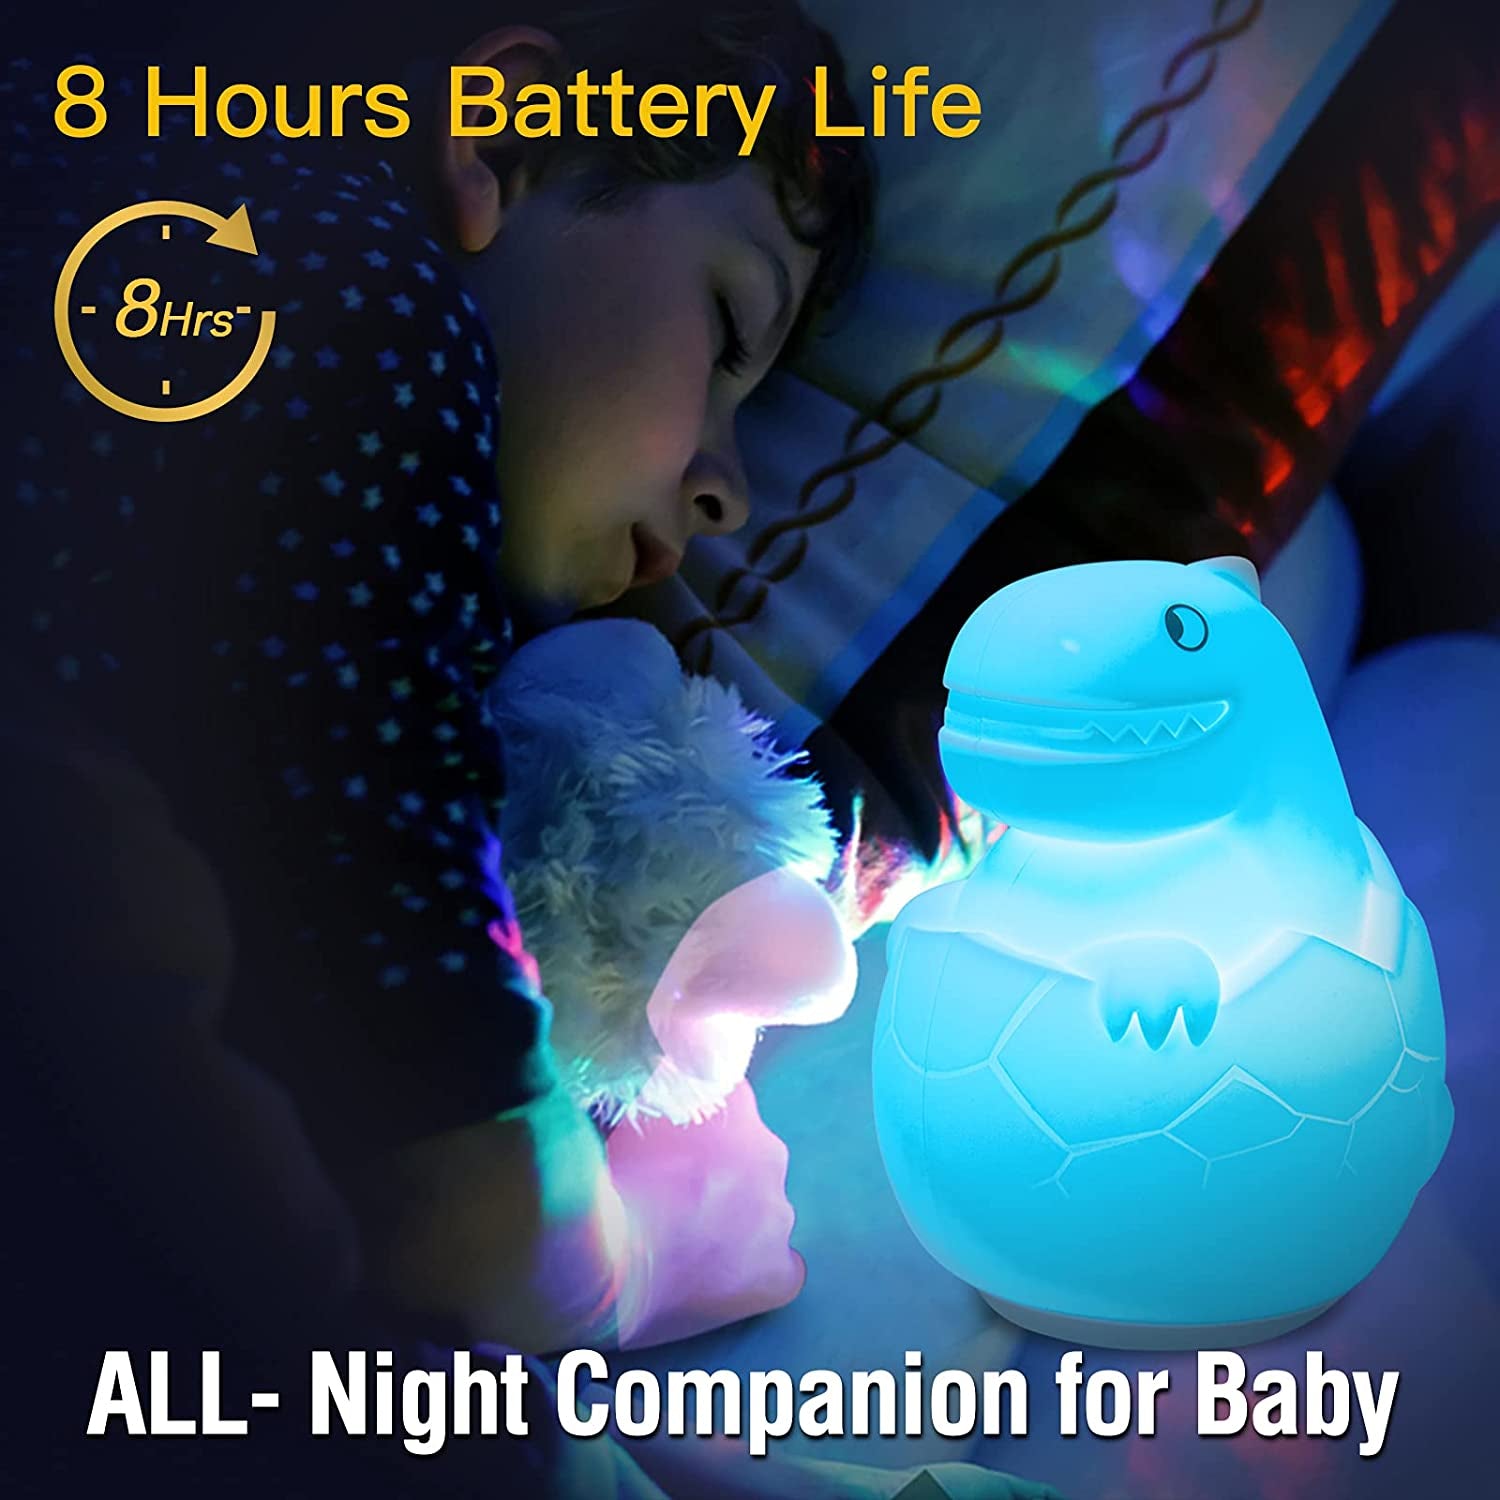 Dinosaur Night Light for Kids Room, BIRUI Cute Dino Lamp Boys Toddler Birthday Gifts Color Changing Battery for Girls Baby Nursery, Portable Squishy Silicon beside Lamp for Children Bedroom (Modern)